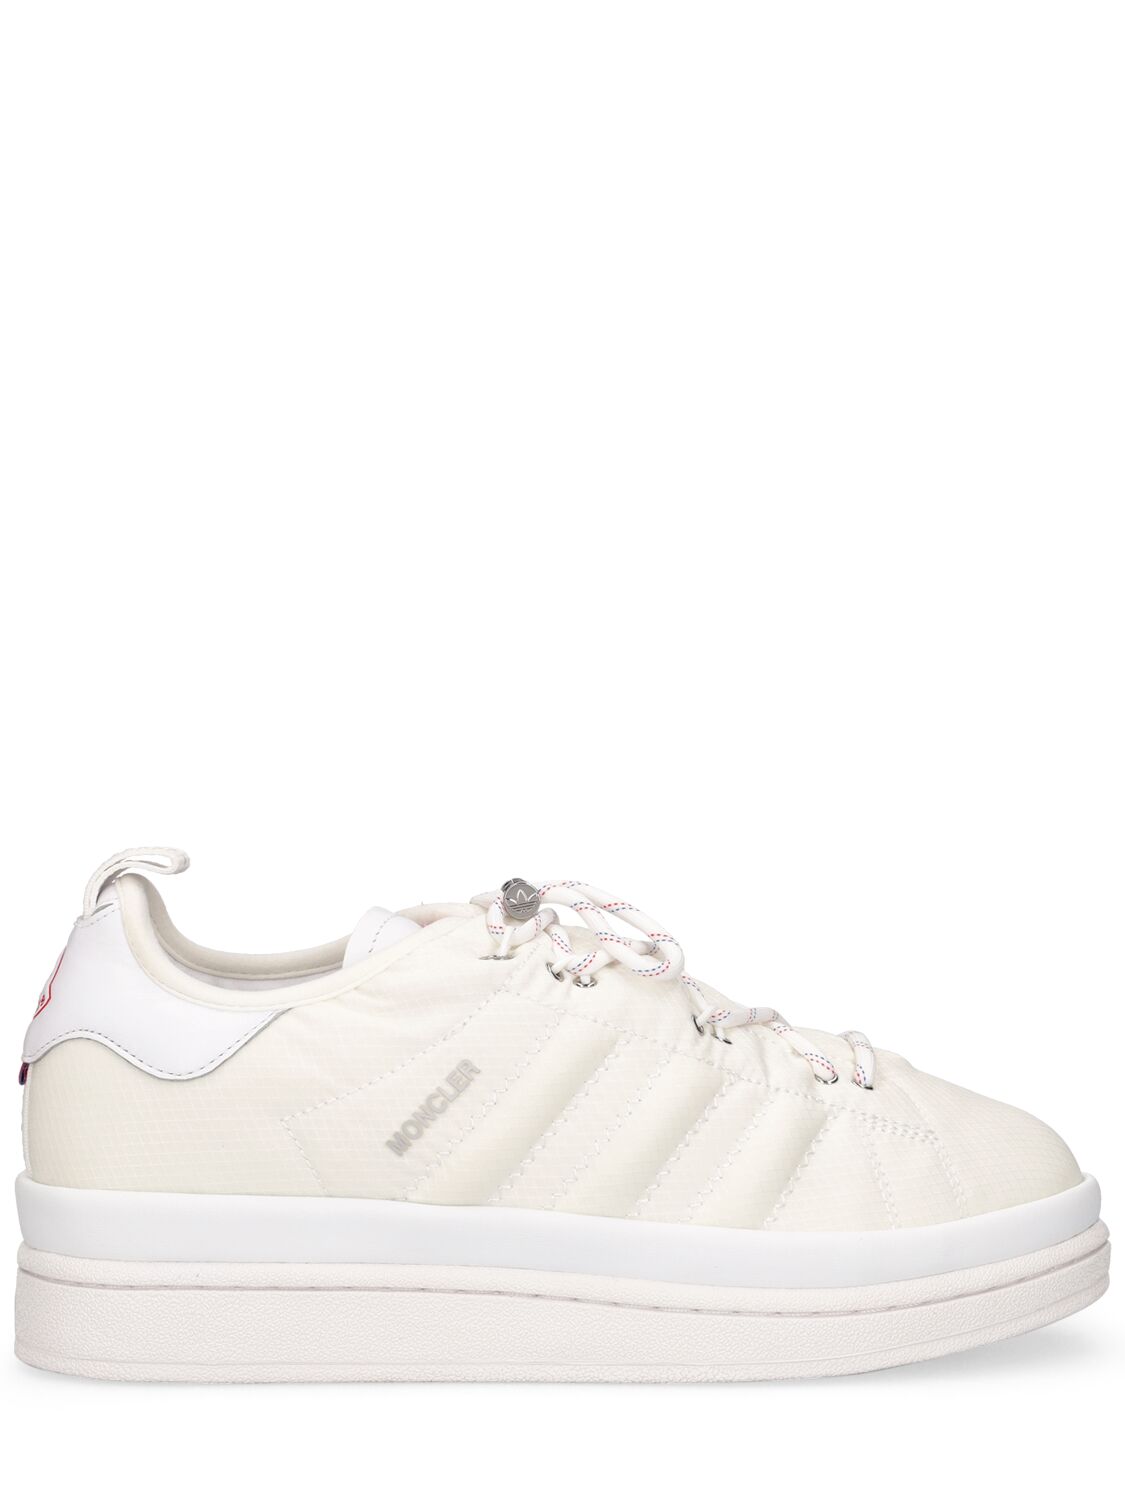 Moncler X Adidas Campus Leather Sneakers